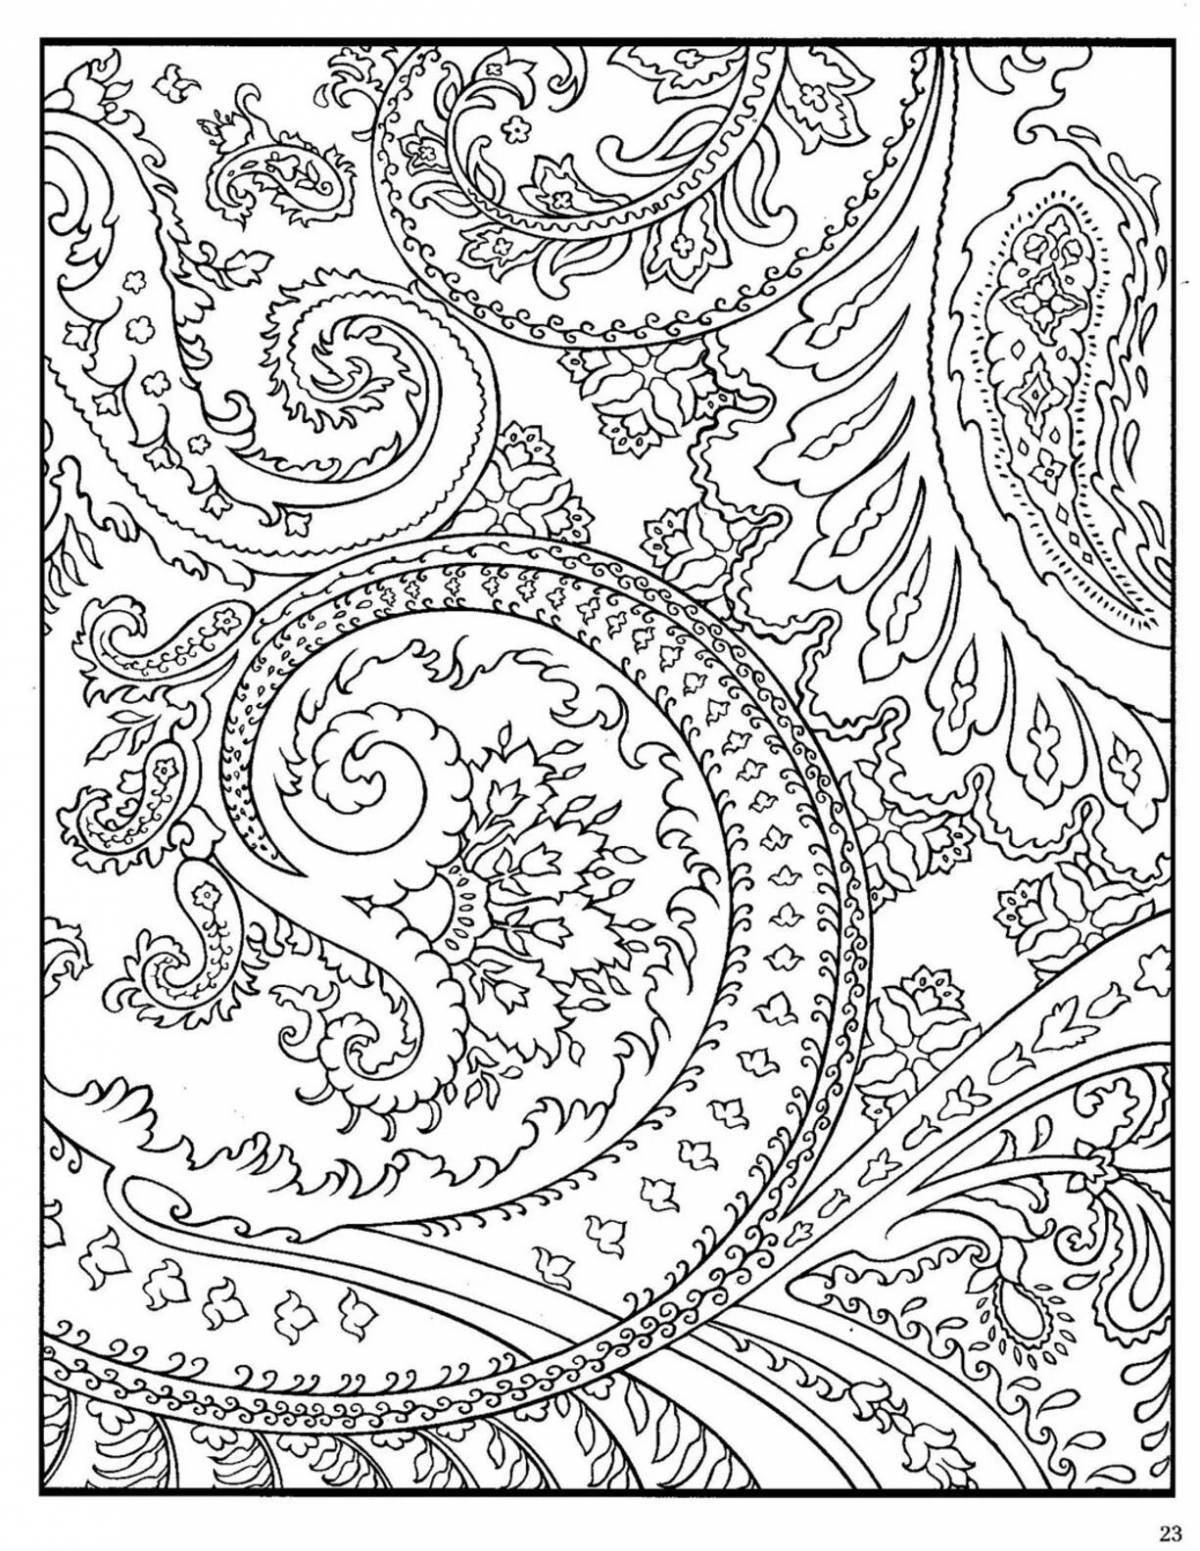 Adorable coloring patterns